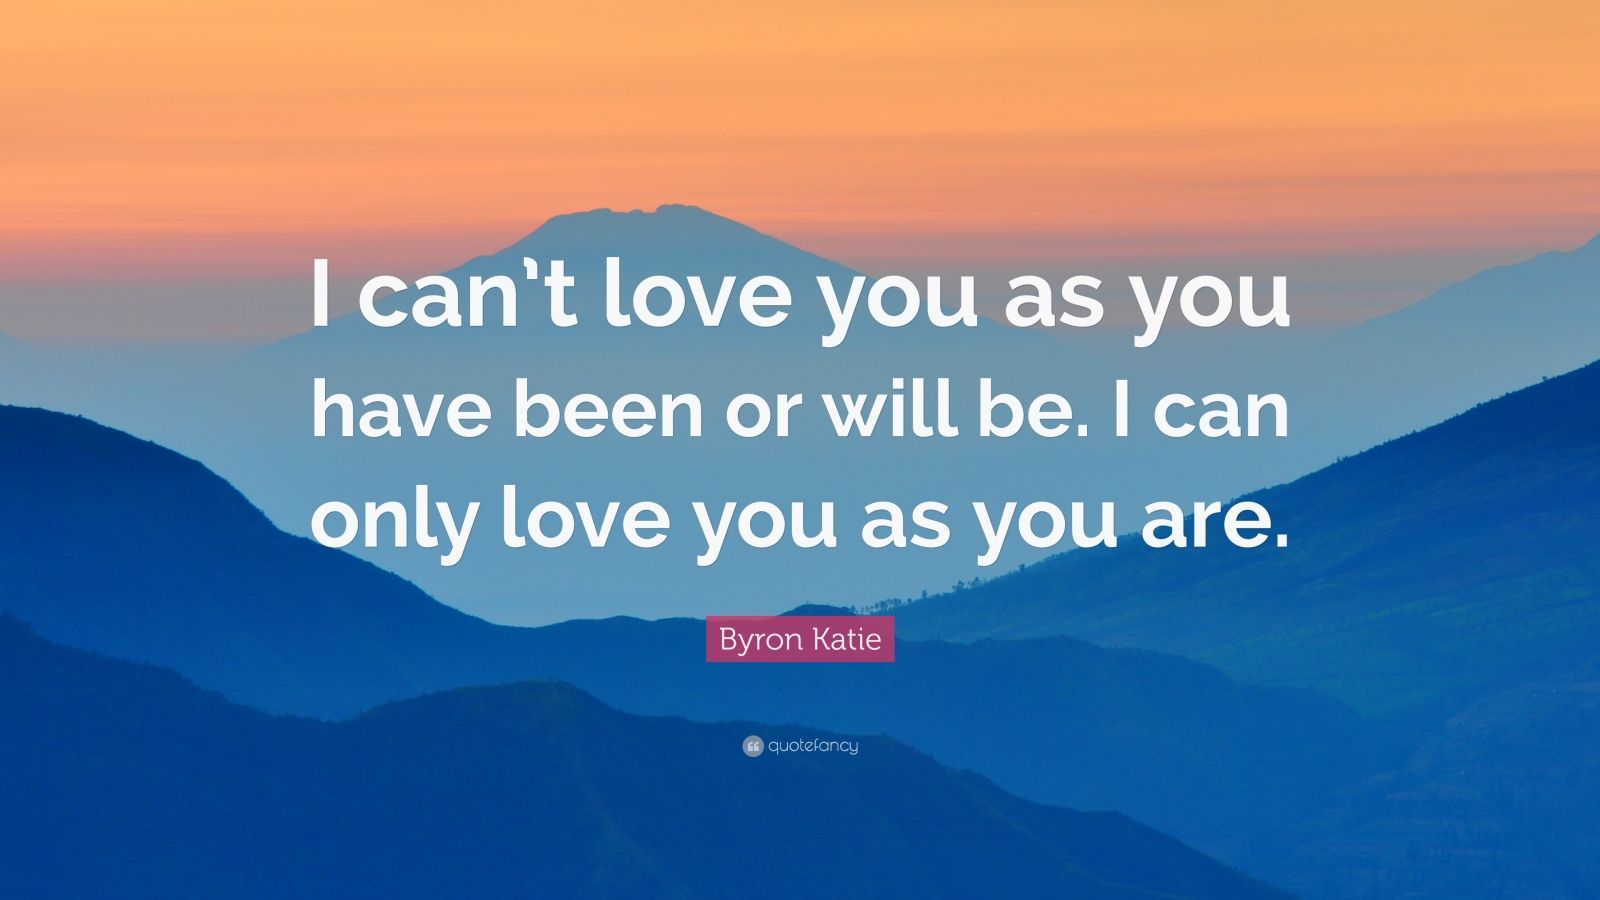 Byron Katie Quote: “I can’t love you as you have been or will be. I can ...